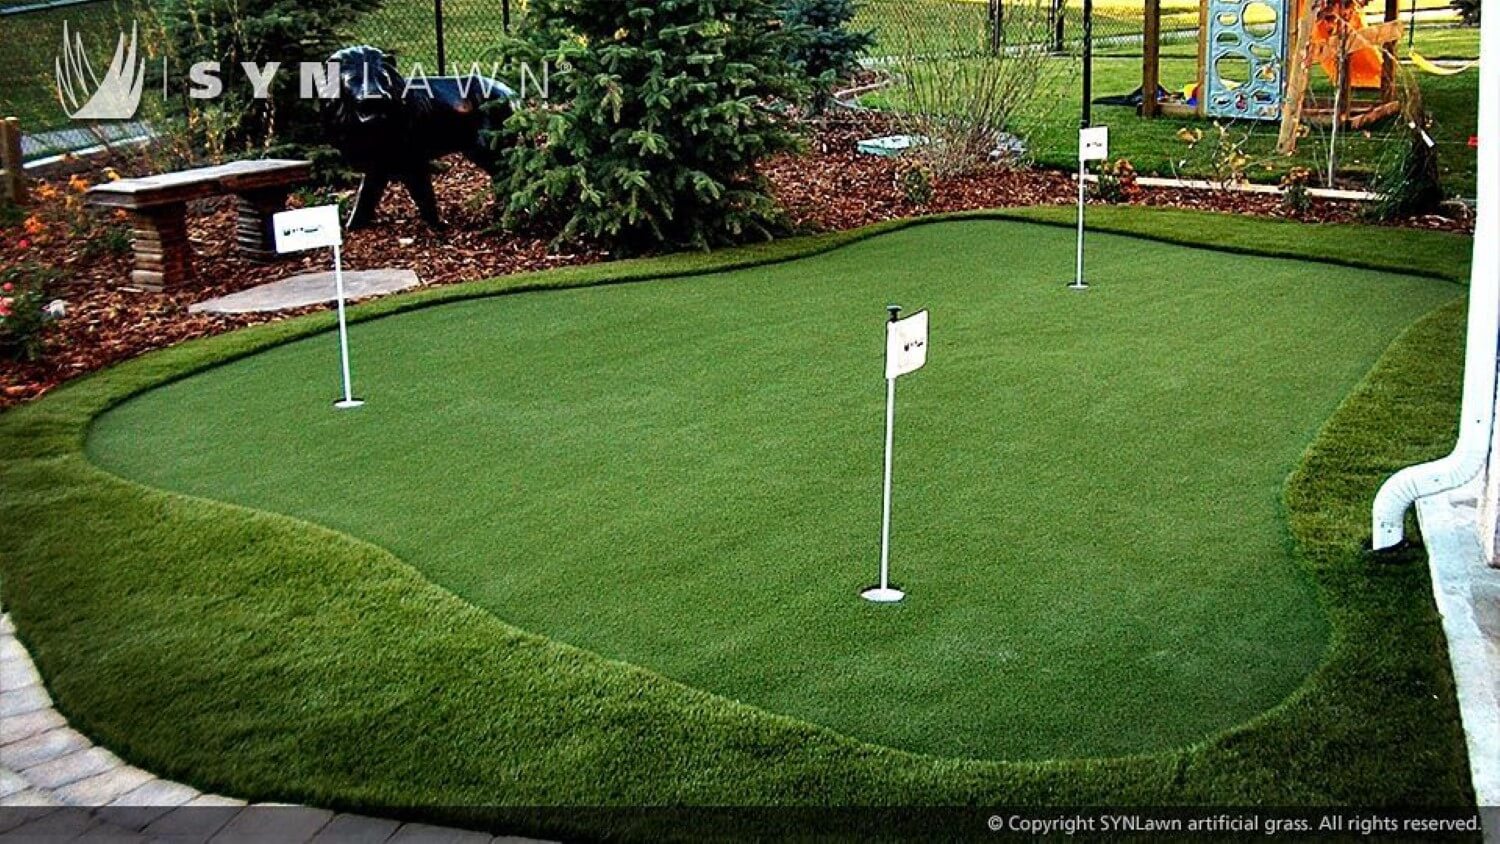 Residential backyard putting green from SYNLawn